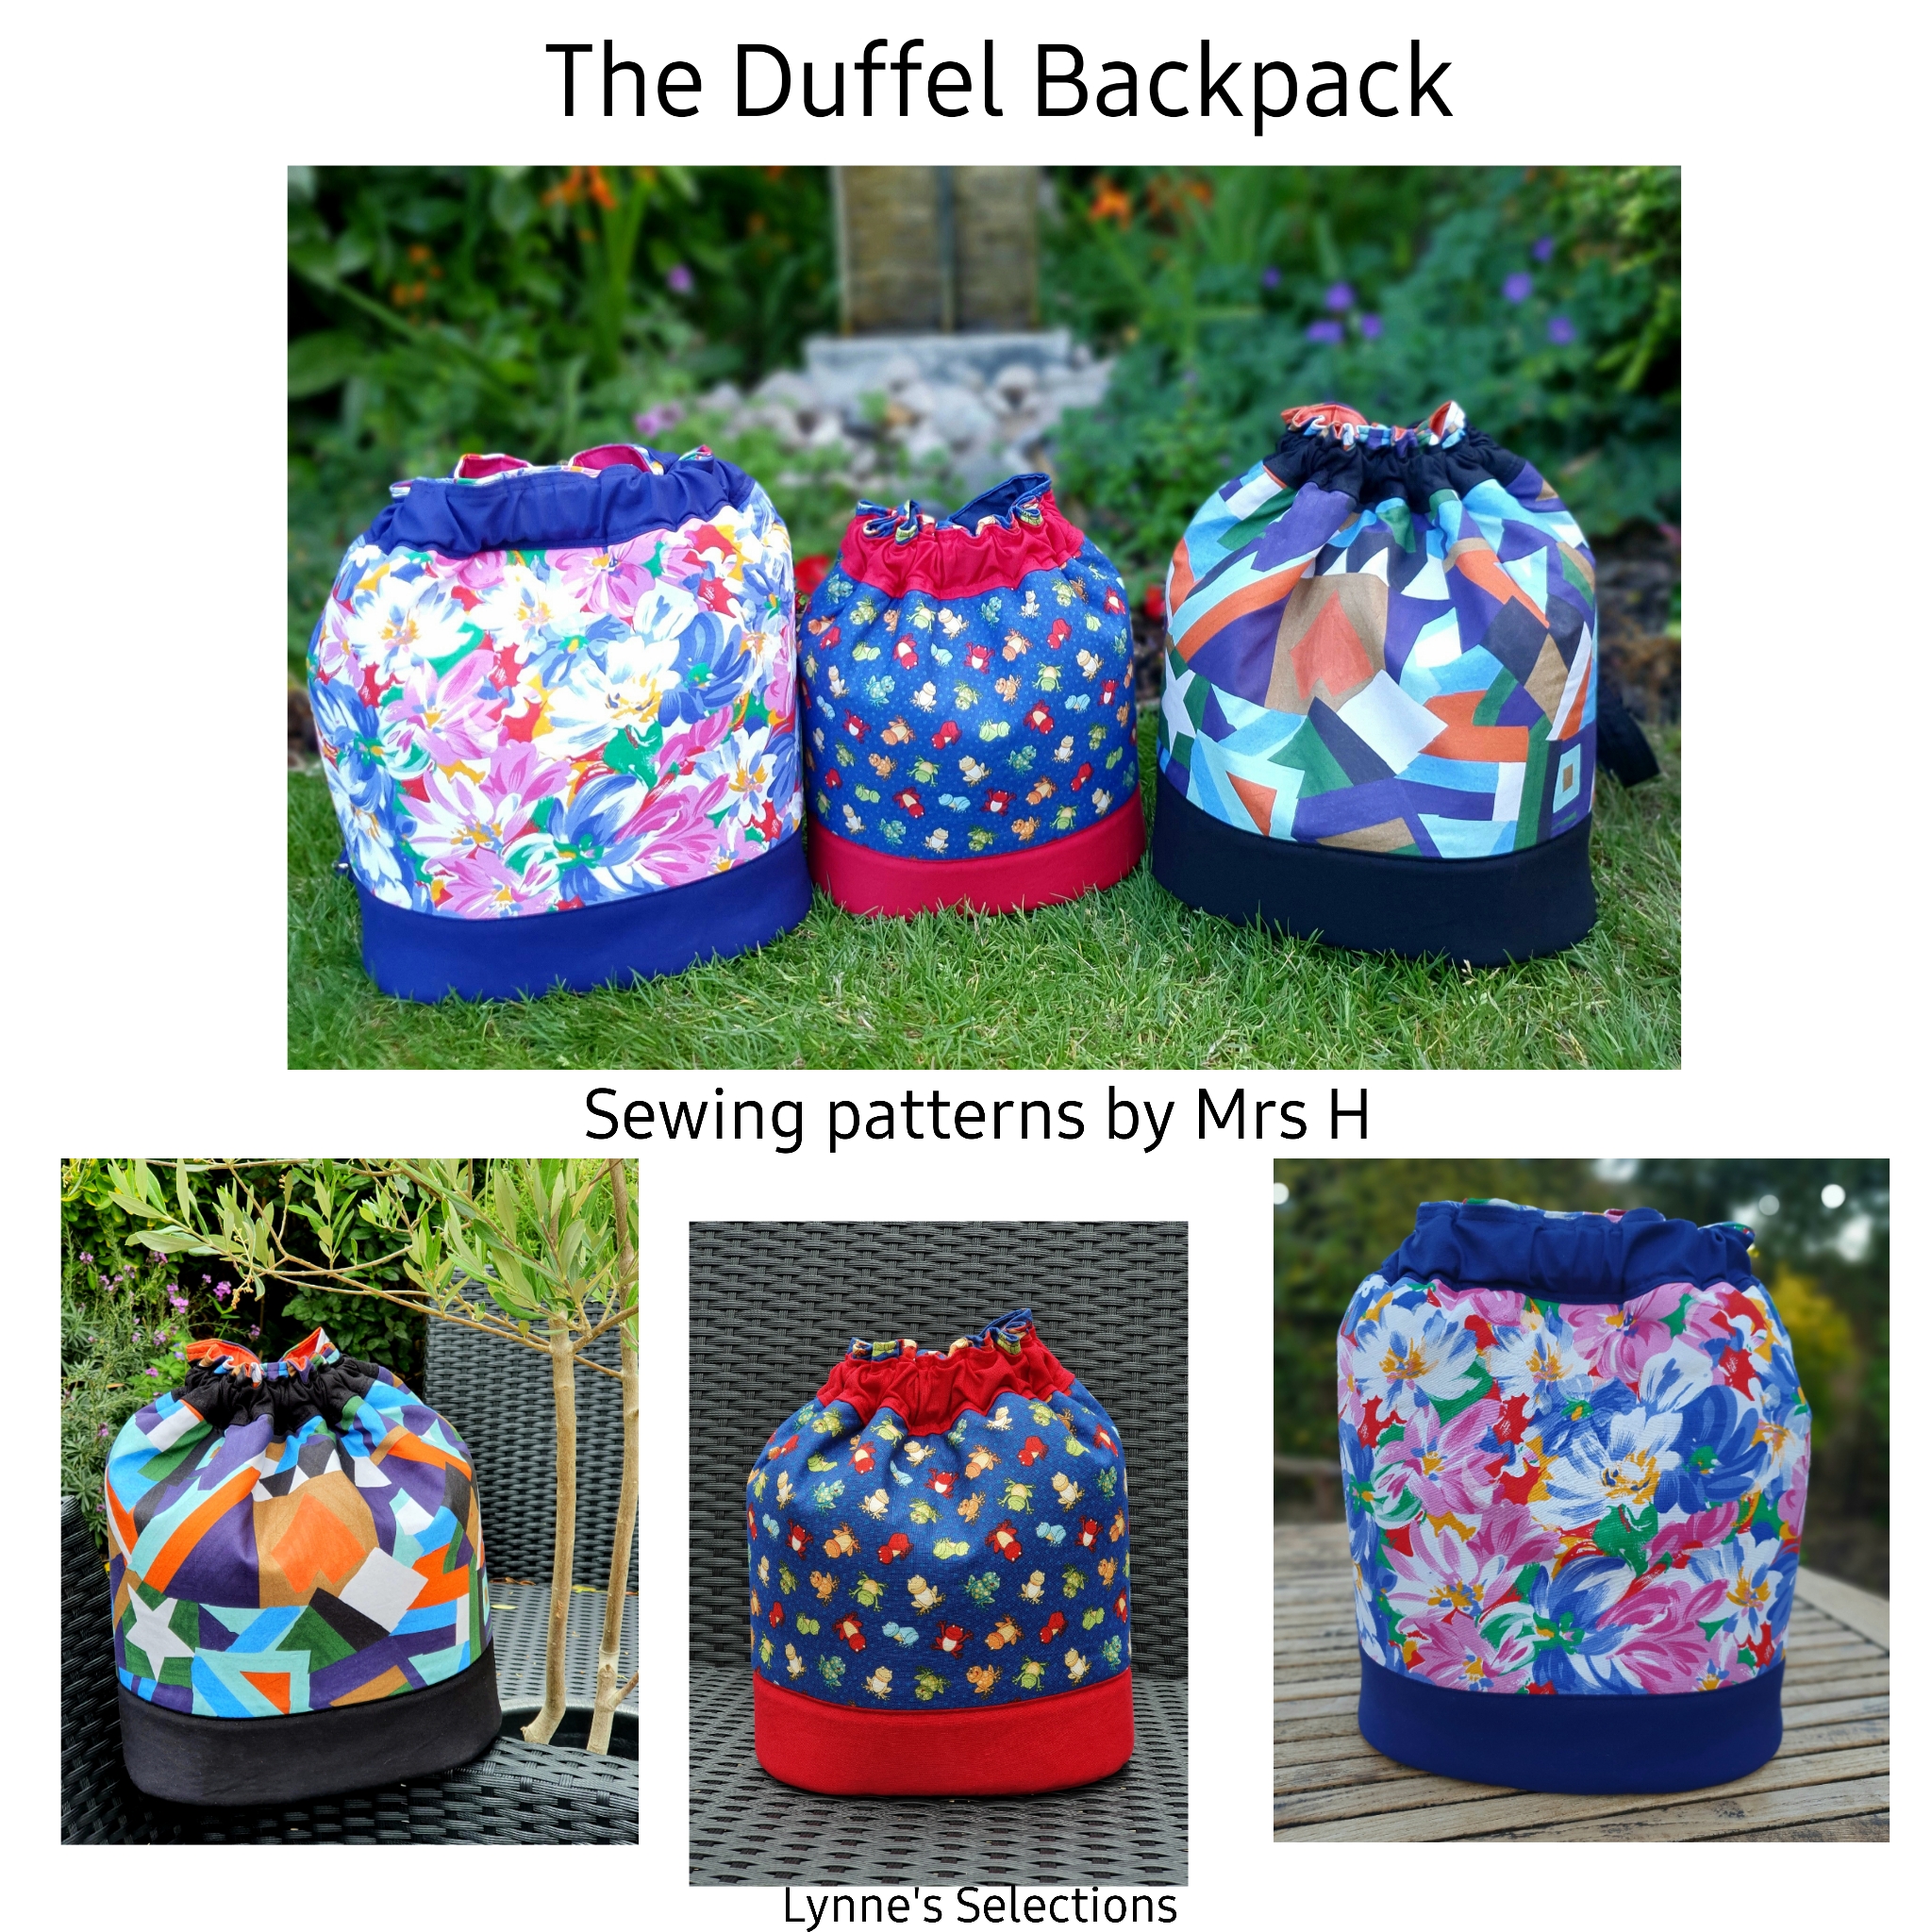  The Duffel Backpack made by Lynne of Lynne's Selections